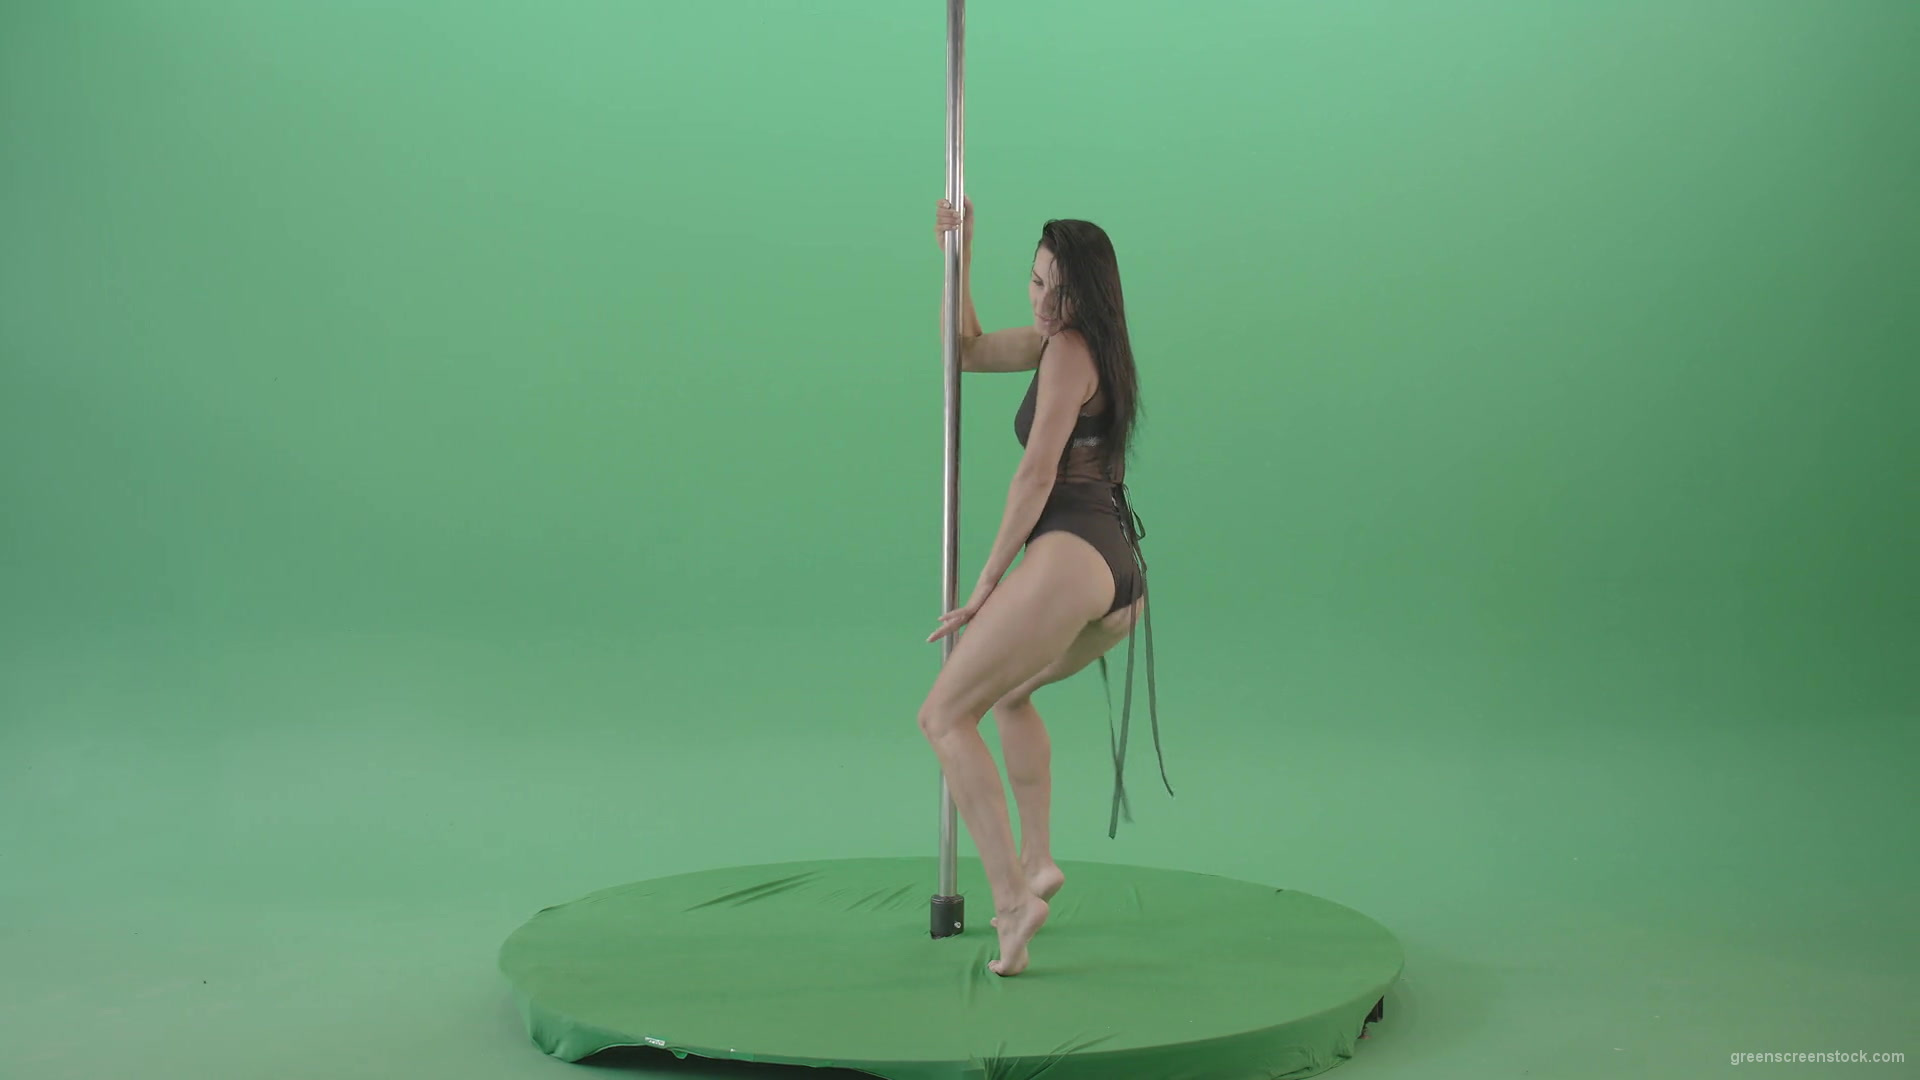 Sexy-girl-in-Lingerie-wear-dancing-strip-pole-dance-isolated-on-green-screen-4K-Video-Footage-1920_009 Green Screen Stock